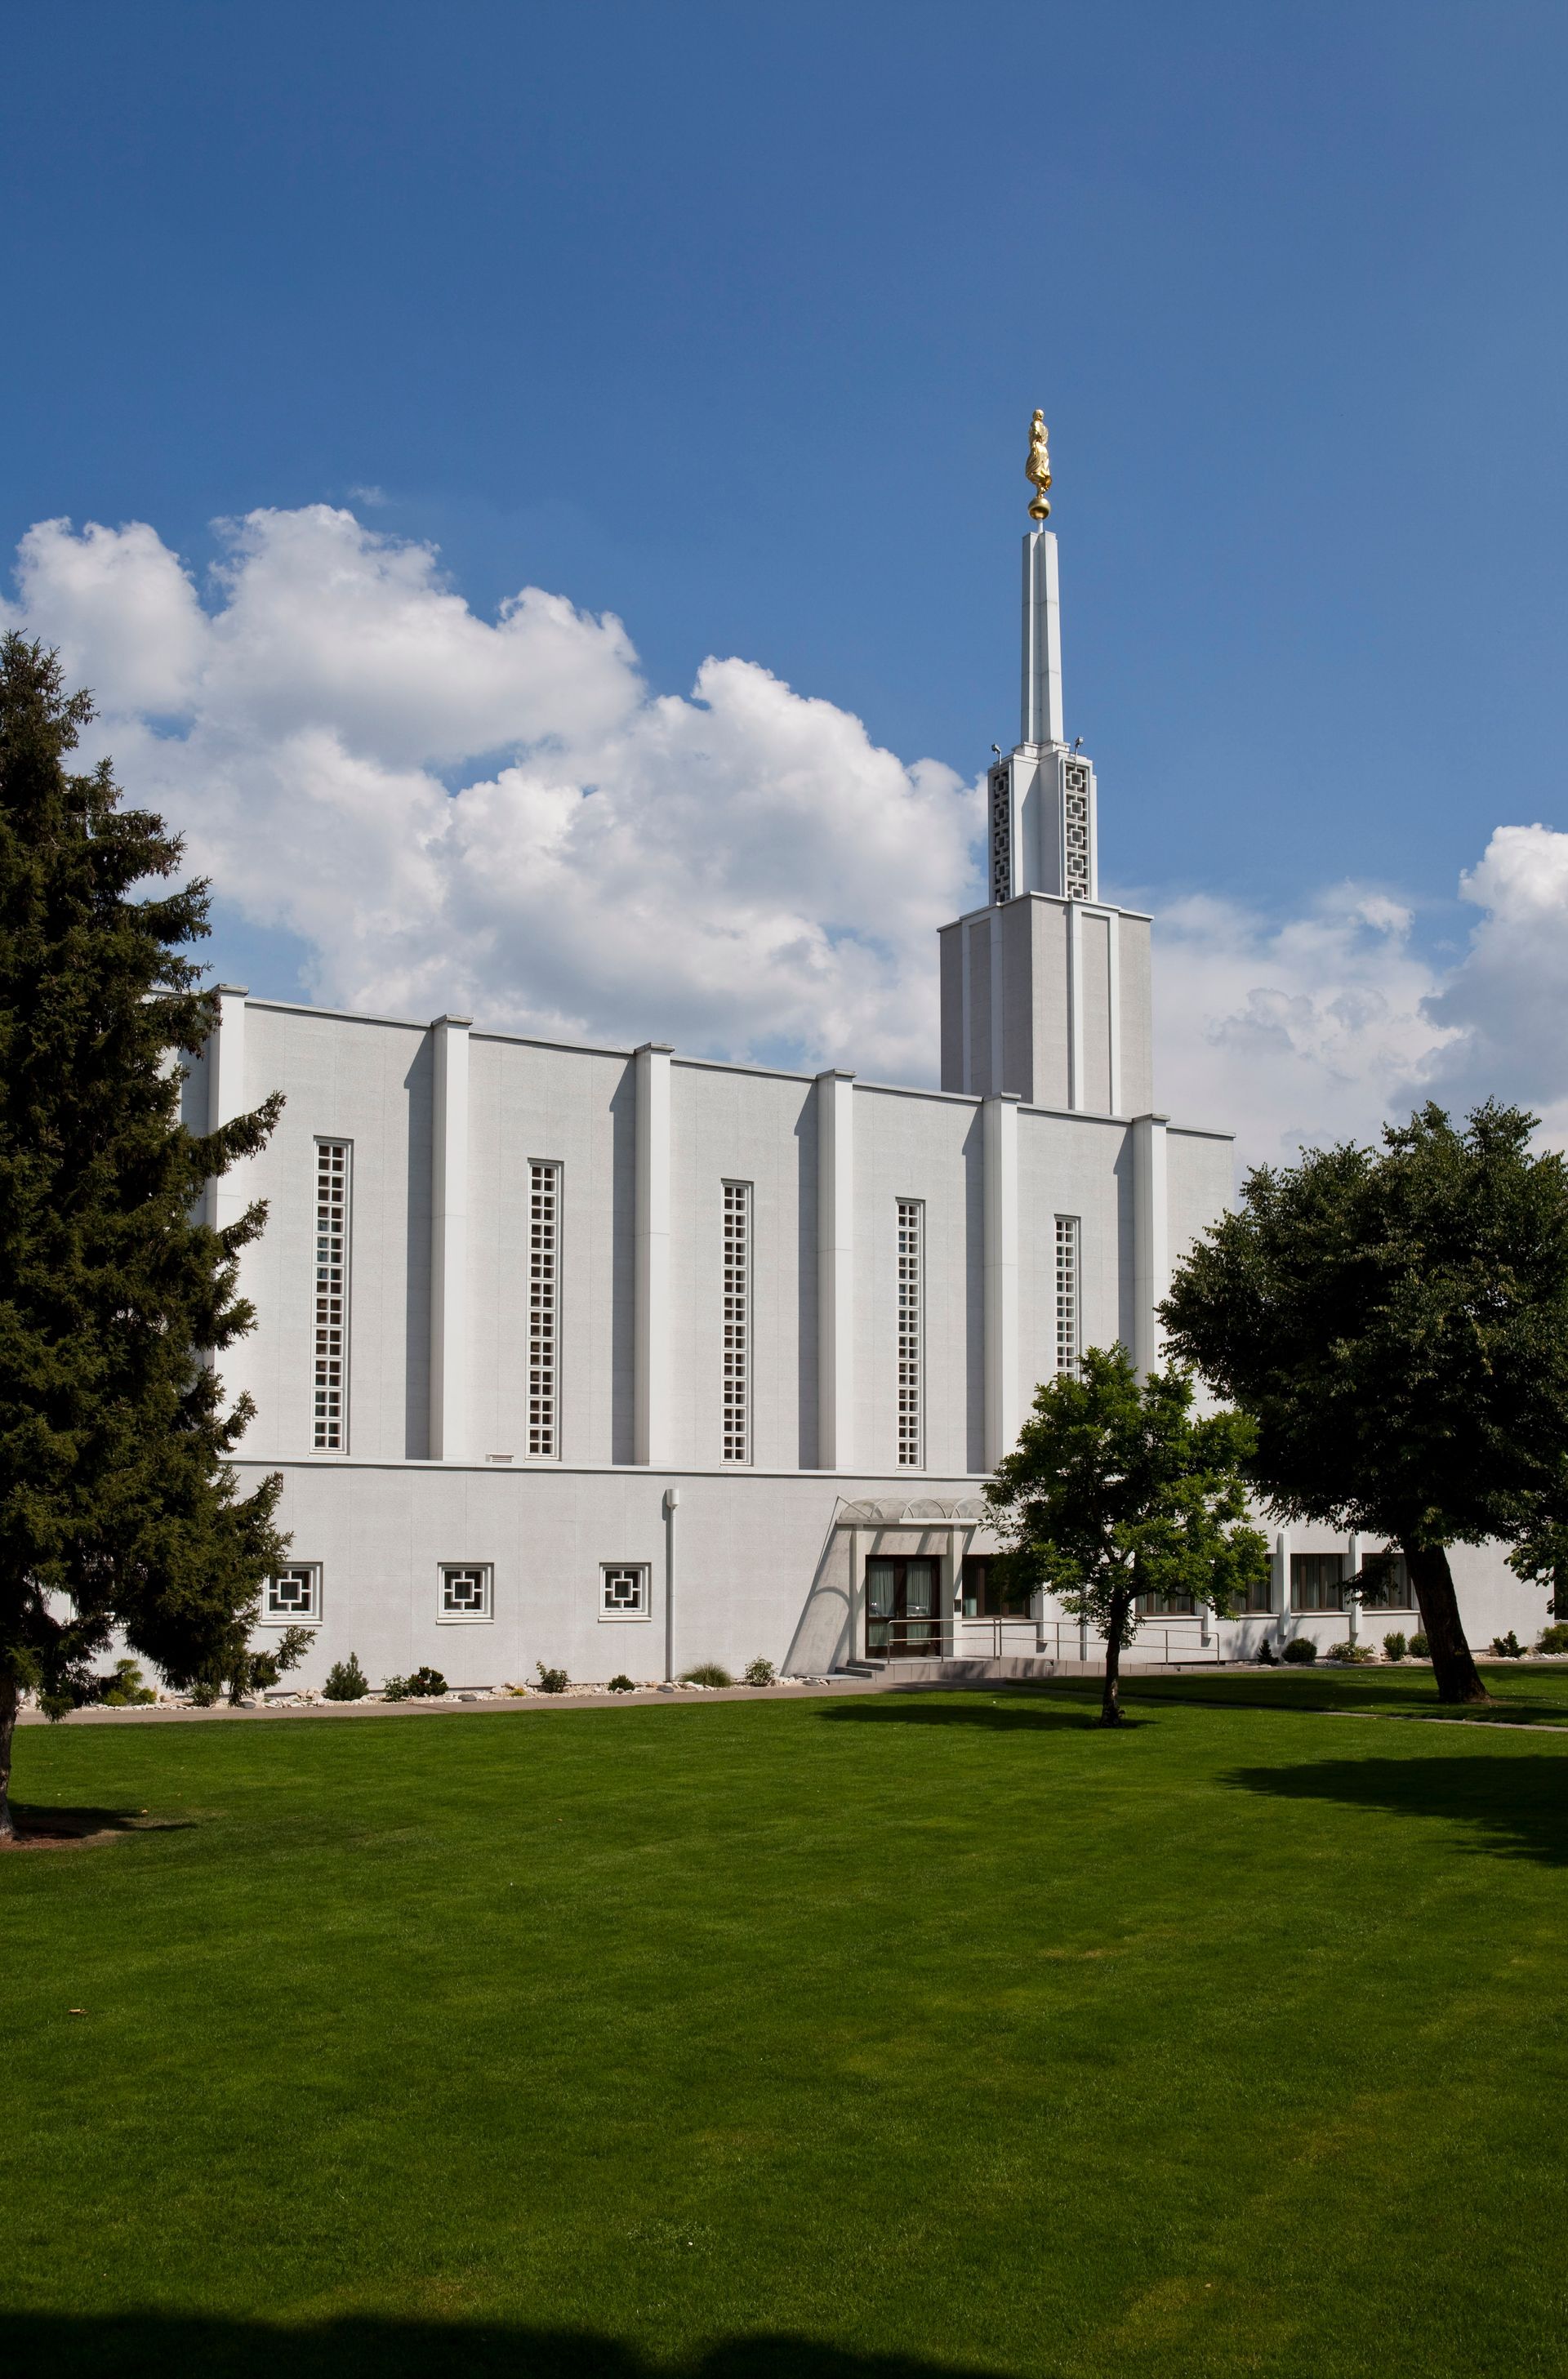 A side view of the exterior of the Bern Switzerland Temple and grounds.  